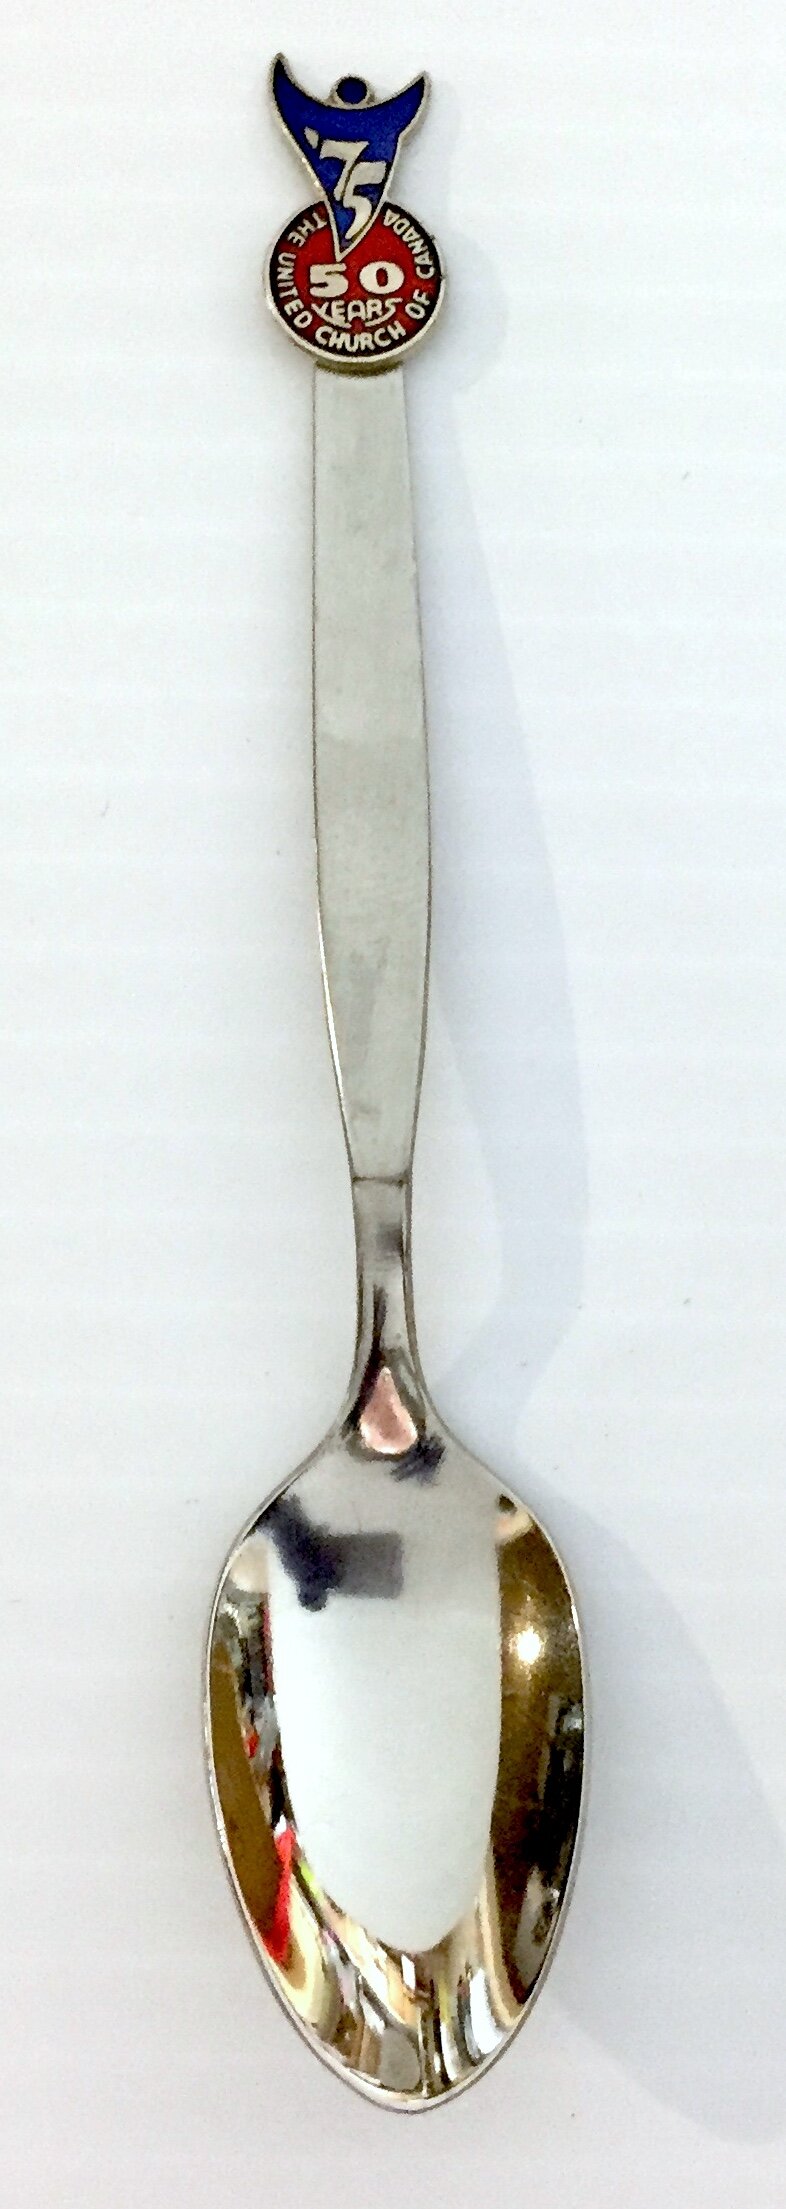  Spoon from the 50th Anniversary of the United Church of Canada 